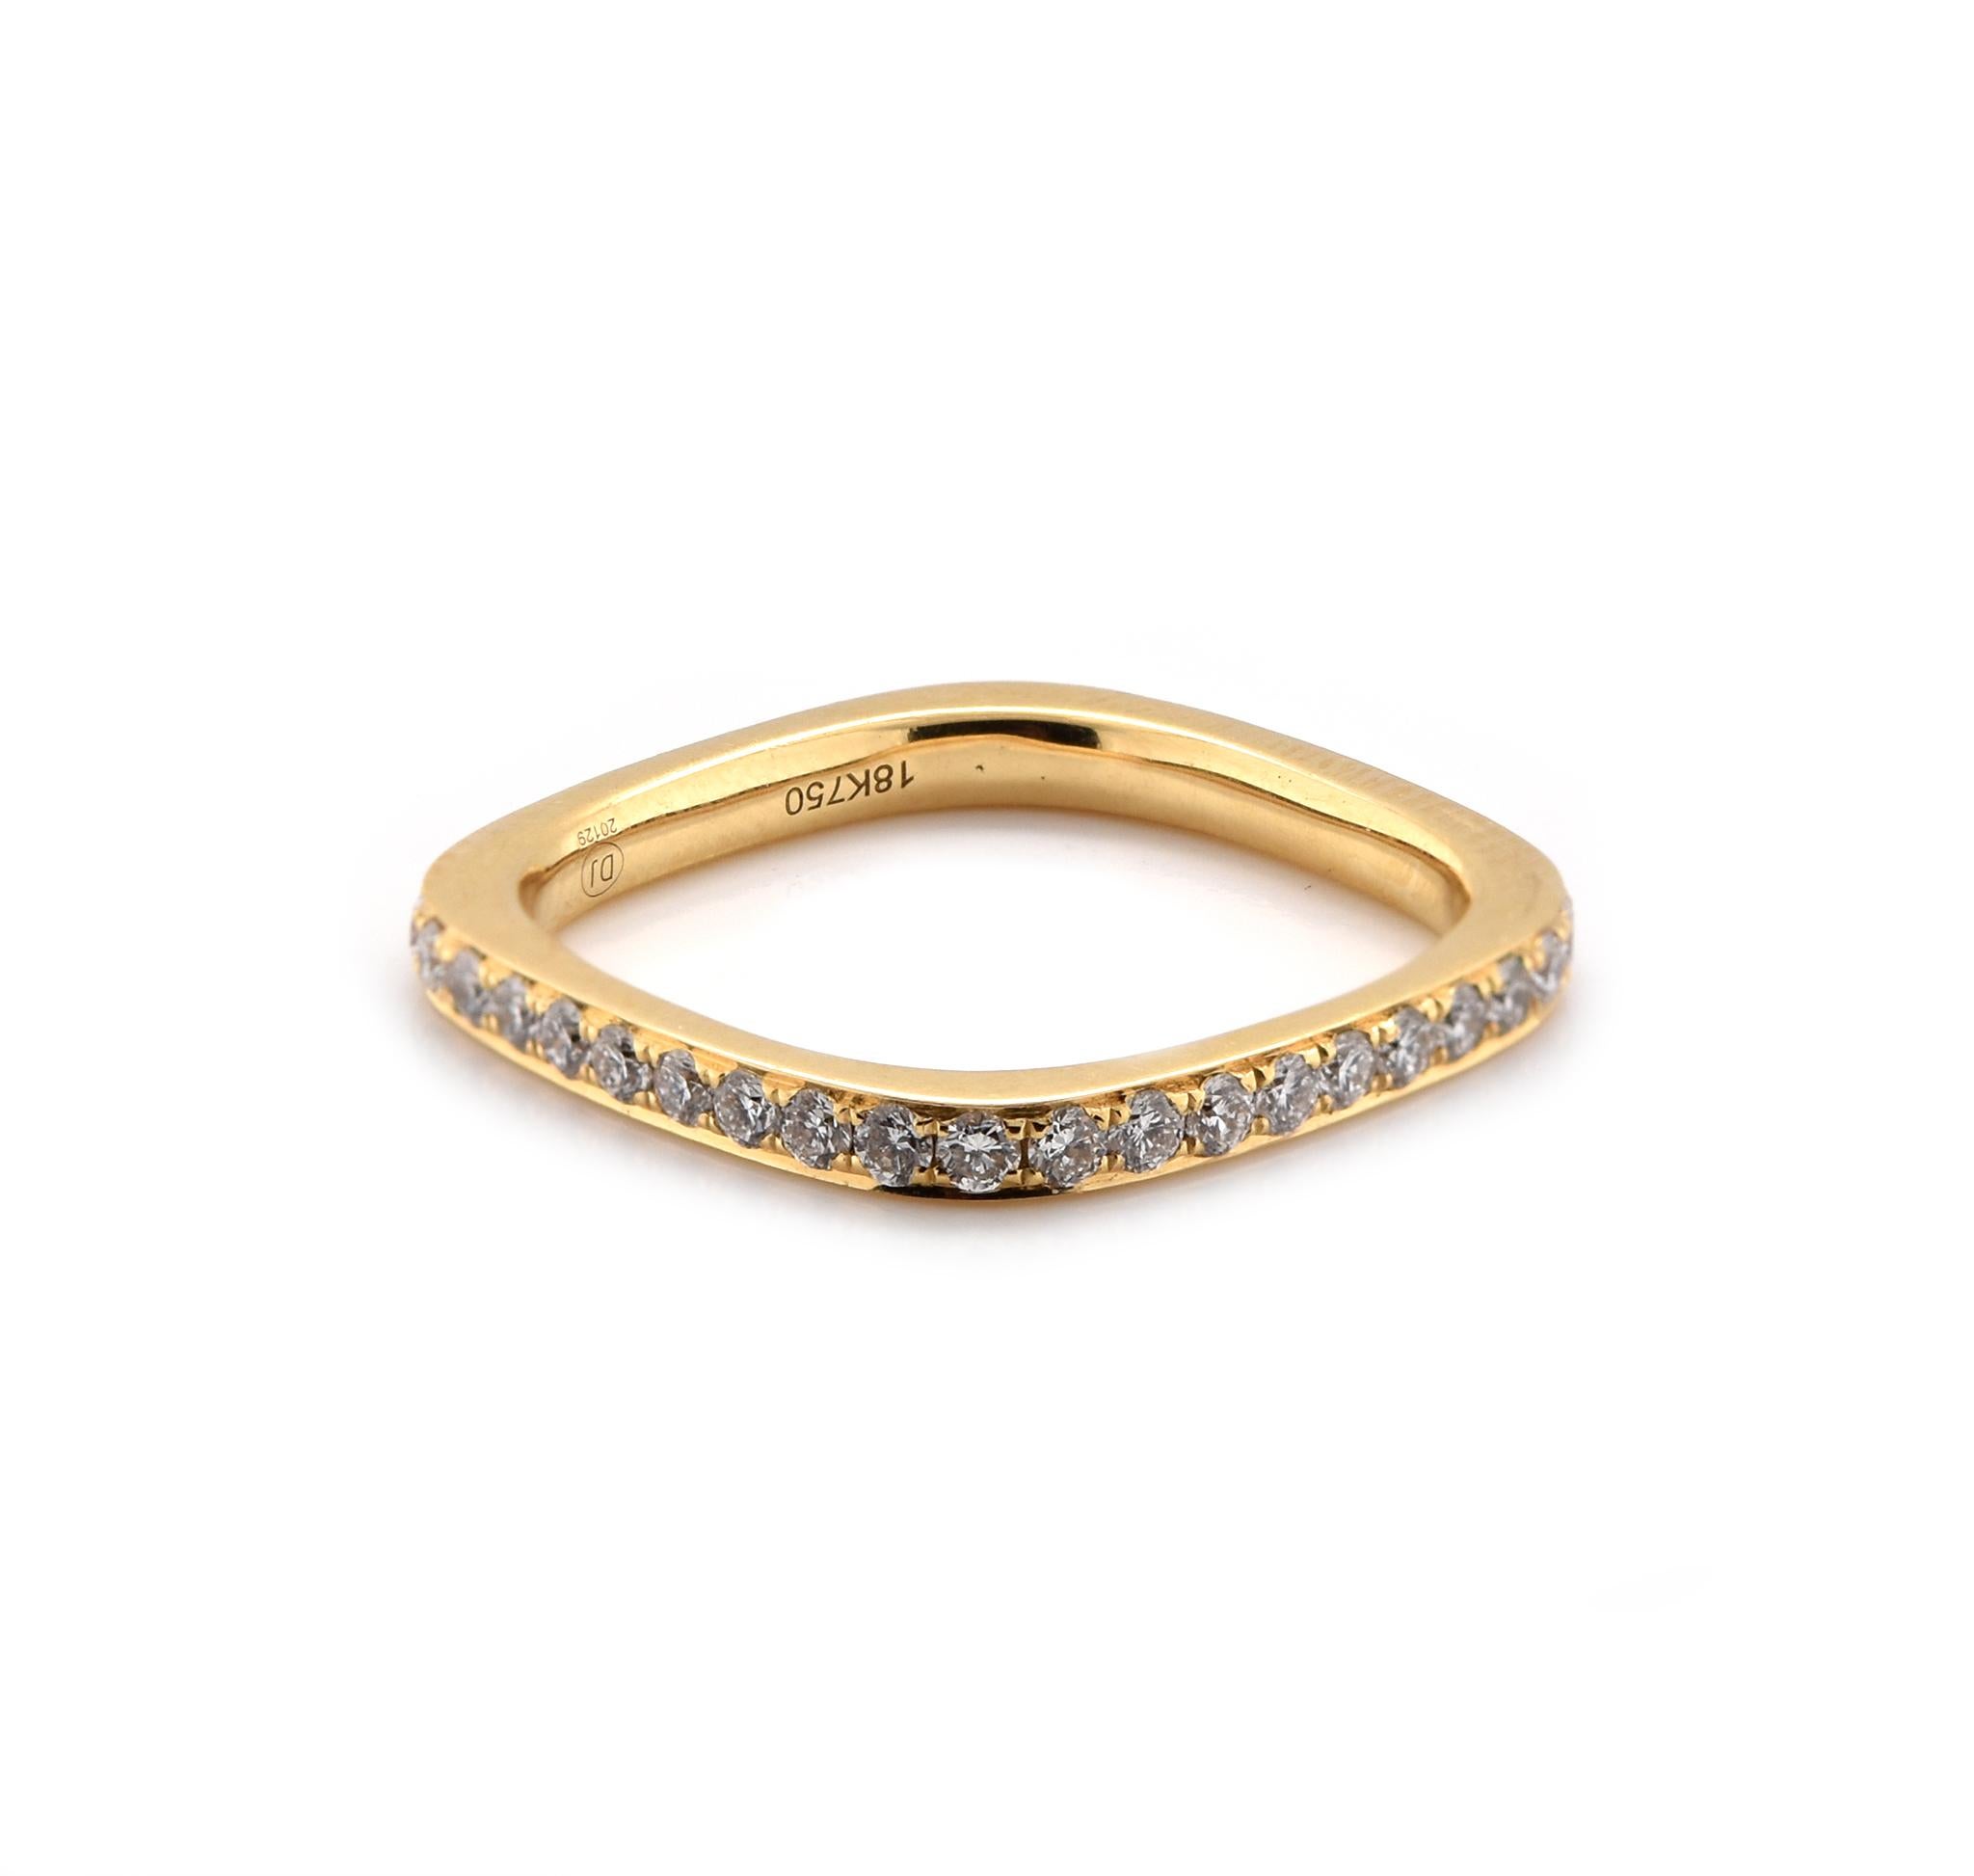 Designer: Custom
Material: 18K yellow gold
Diamonds: 40 round cut = .75cttw
Color: G
Clarity: VS2
Size: 7
Dimensions: ring measures 2.7mm in width
Weight: 2.63grams
